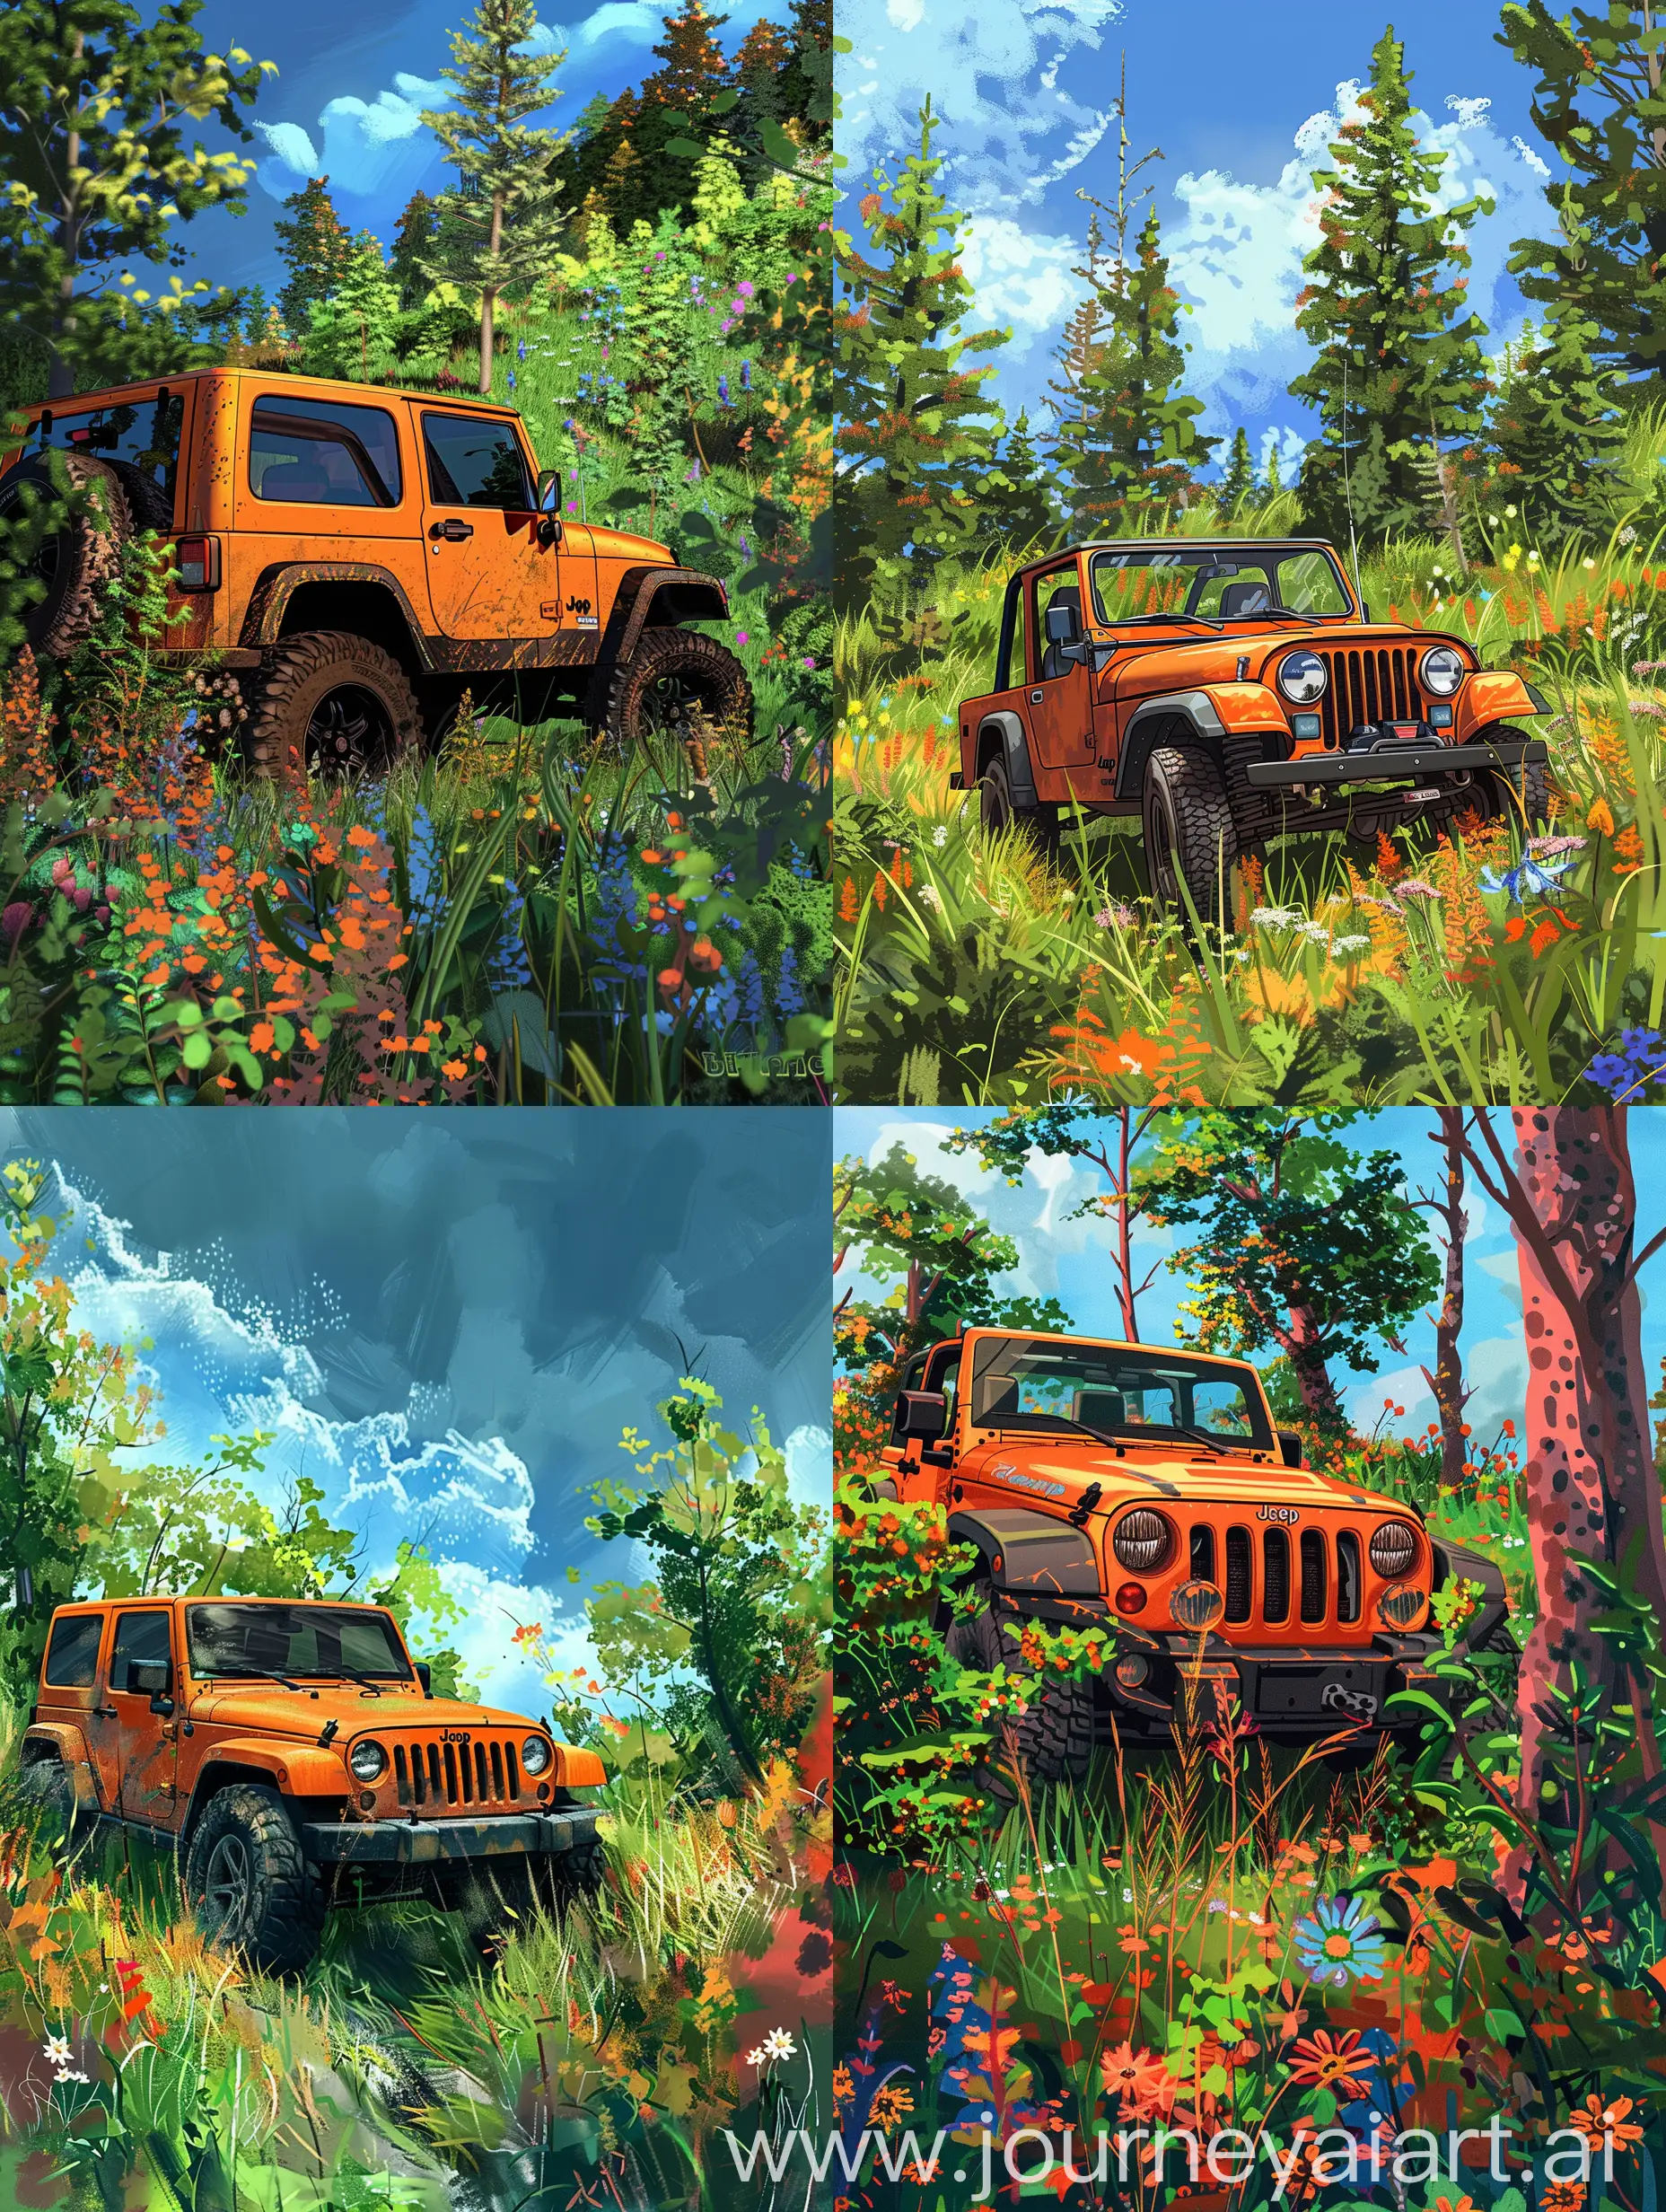 A digital painting of a orange off road car,jeep, parked on the,Meadow,vivid,Trees,grasses,different color of flowers